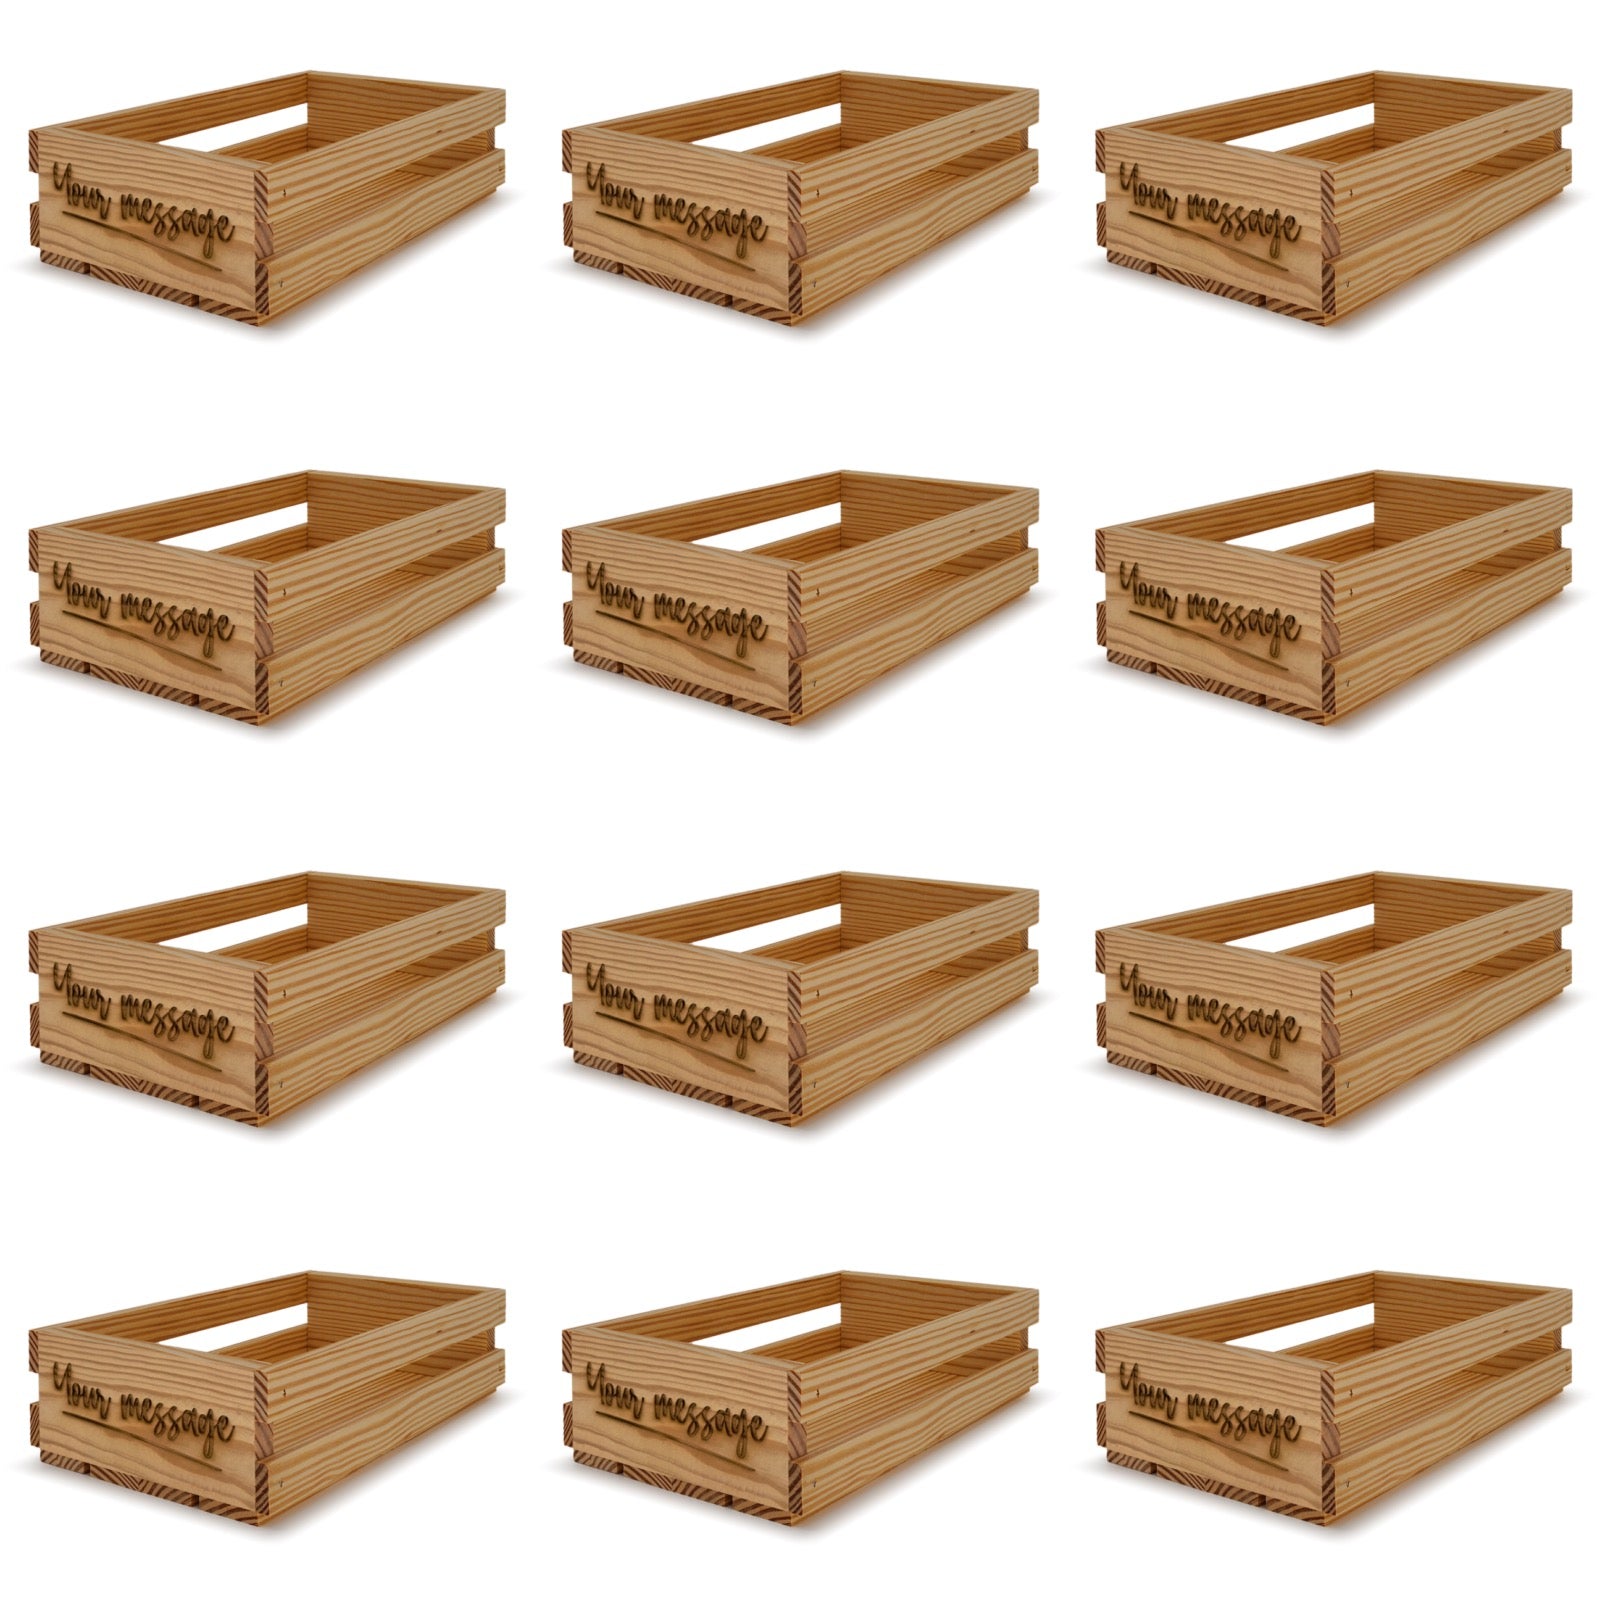 12 Small wooden crates 13x7.5x3.5 your message included